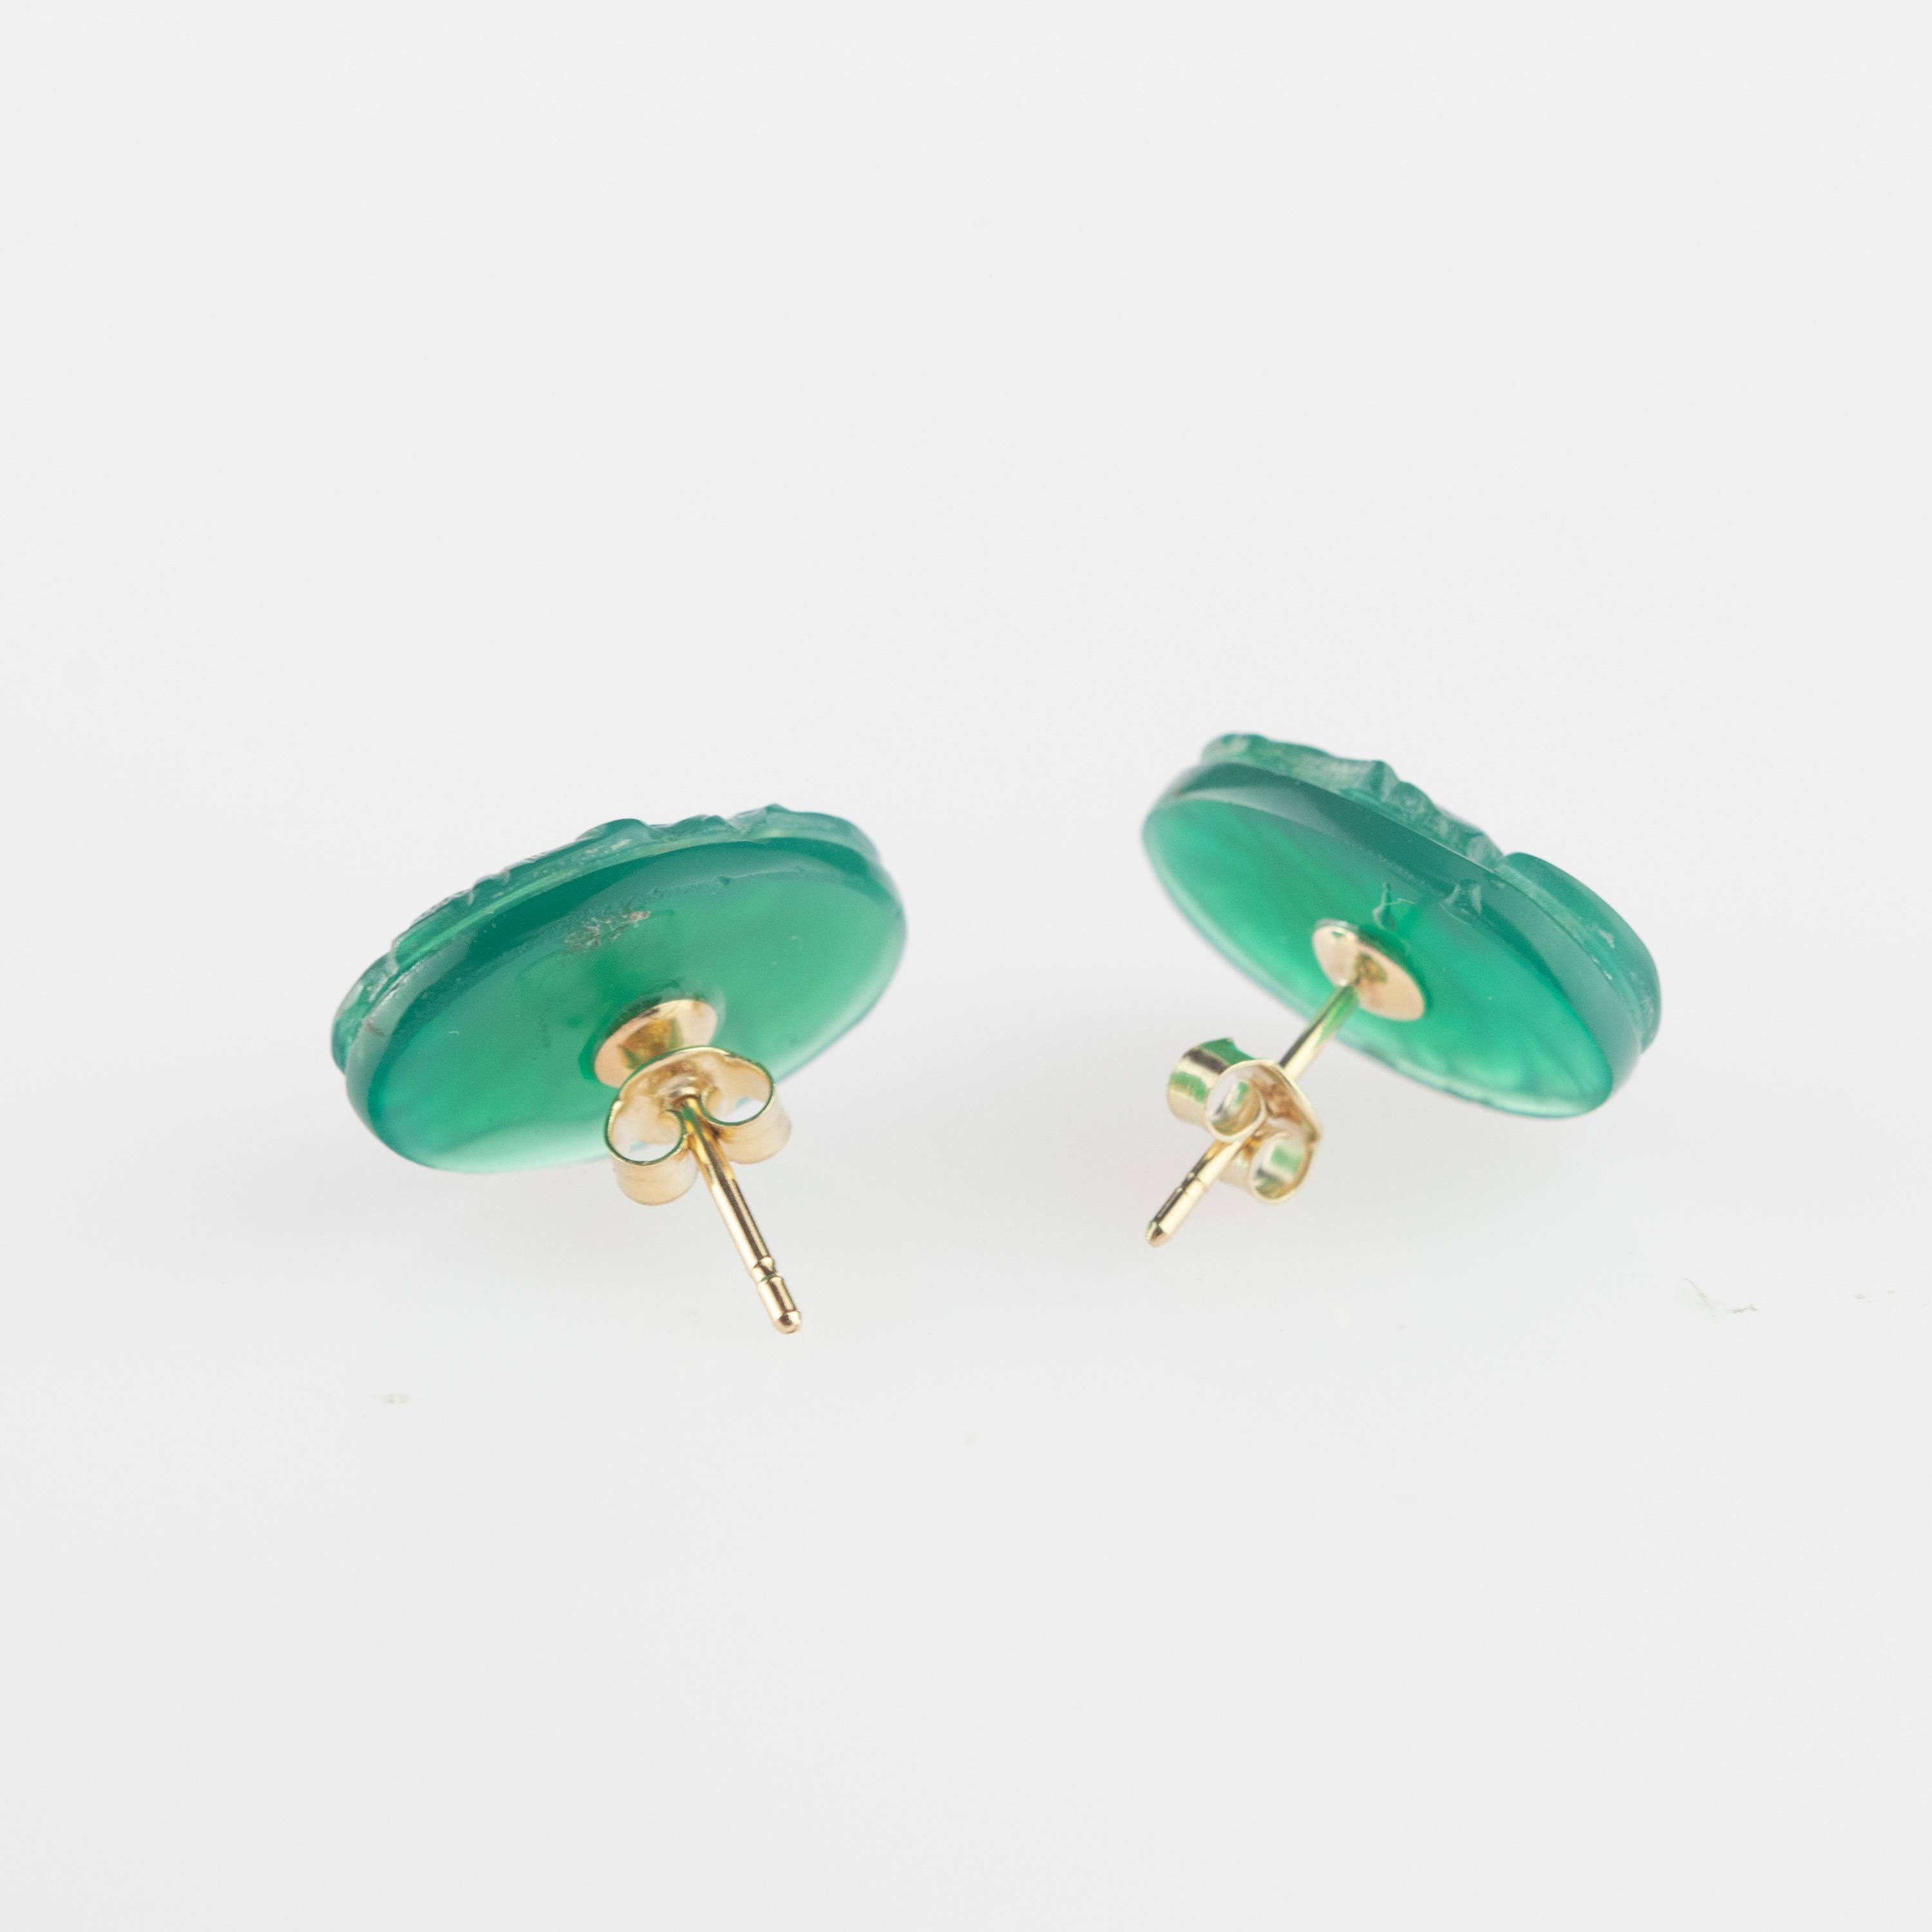 Astonishing and gorgeous green agate stud earrings. Carved woman face that evokes the italian handmade traditional jewelry work.

This delicate design shows the sweetness and innocence of the jewelry. Inspired by a woman's face that can have various